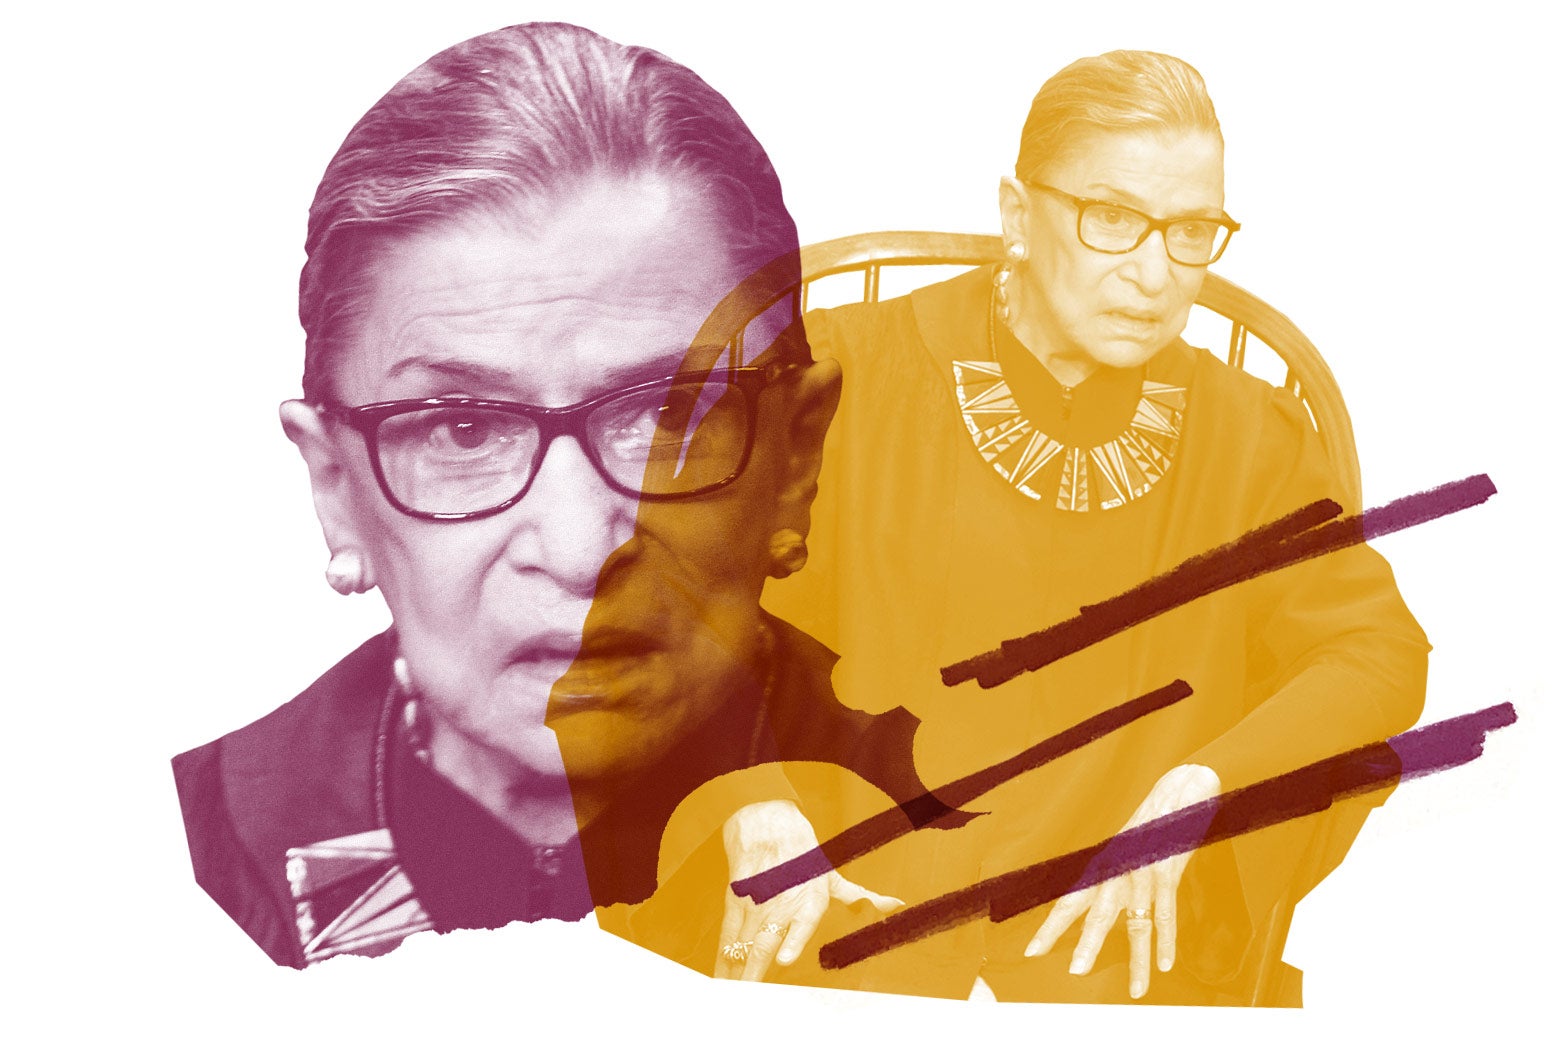 Collage of two images of Ruth Bader Ginsburg.